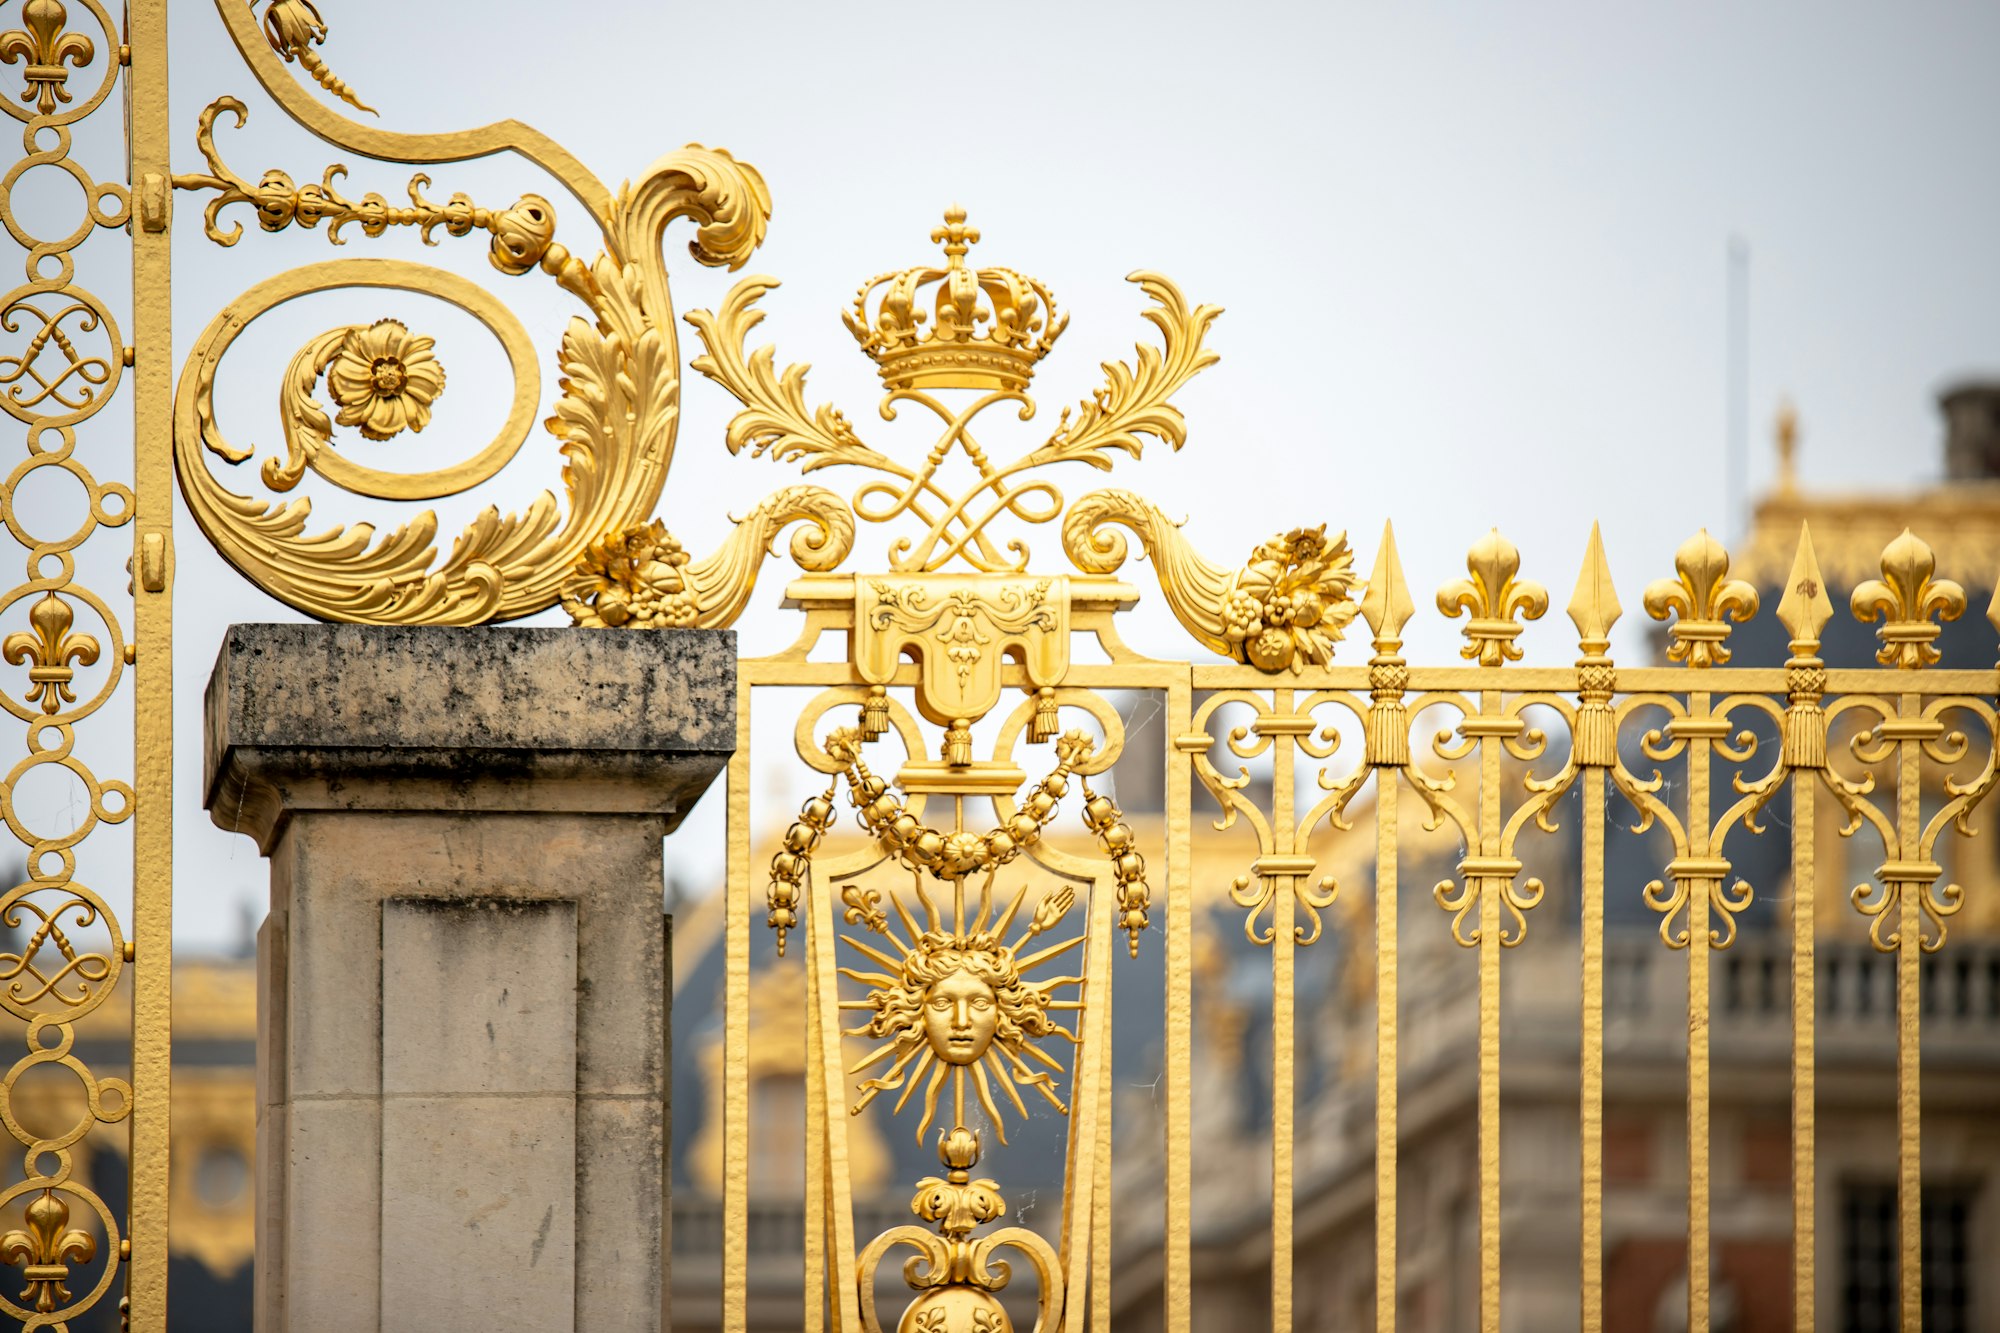 Which State Is Home To The Only Royal Palace In The United States?